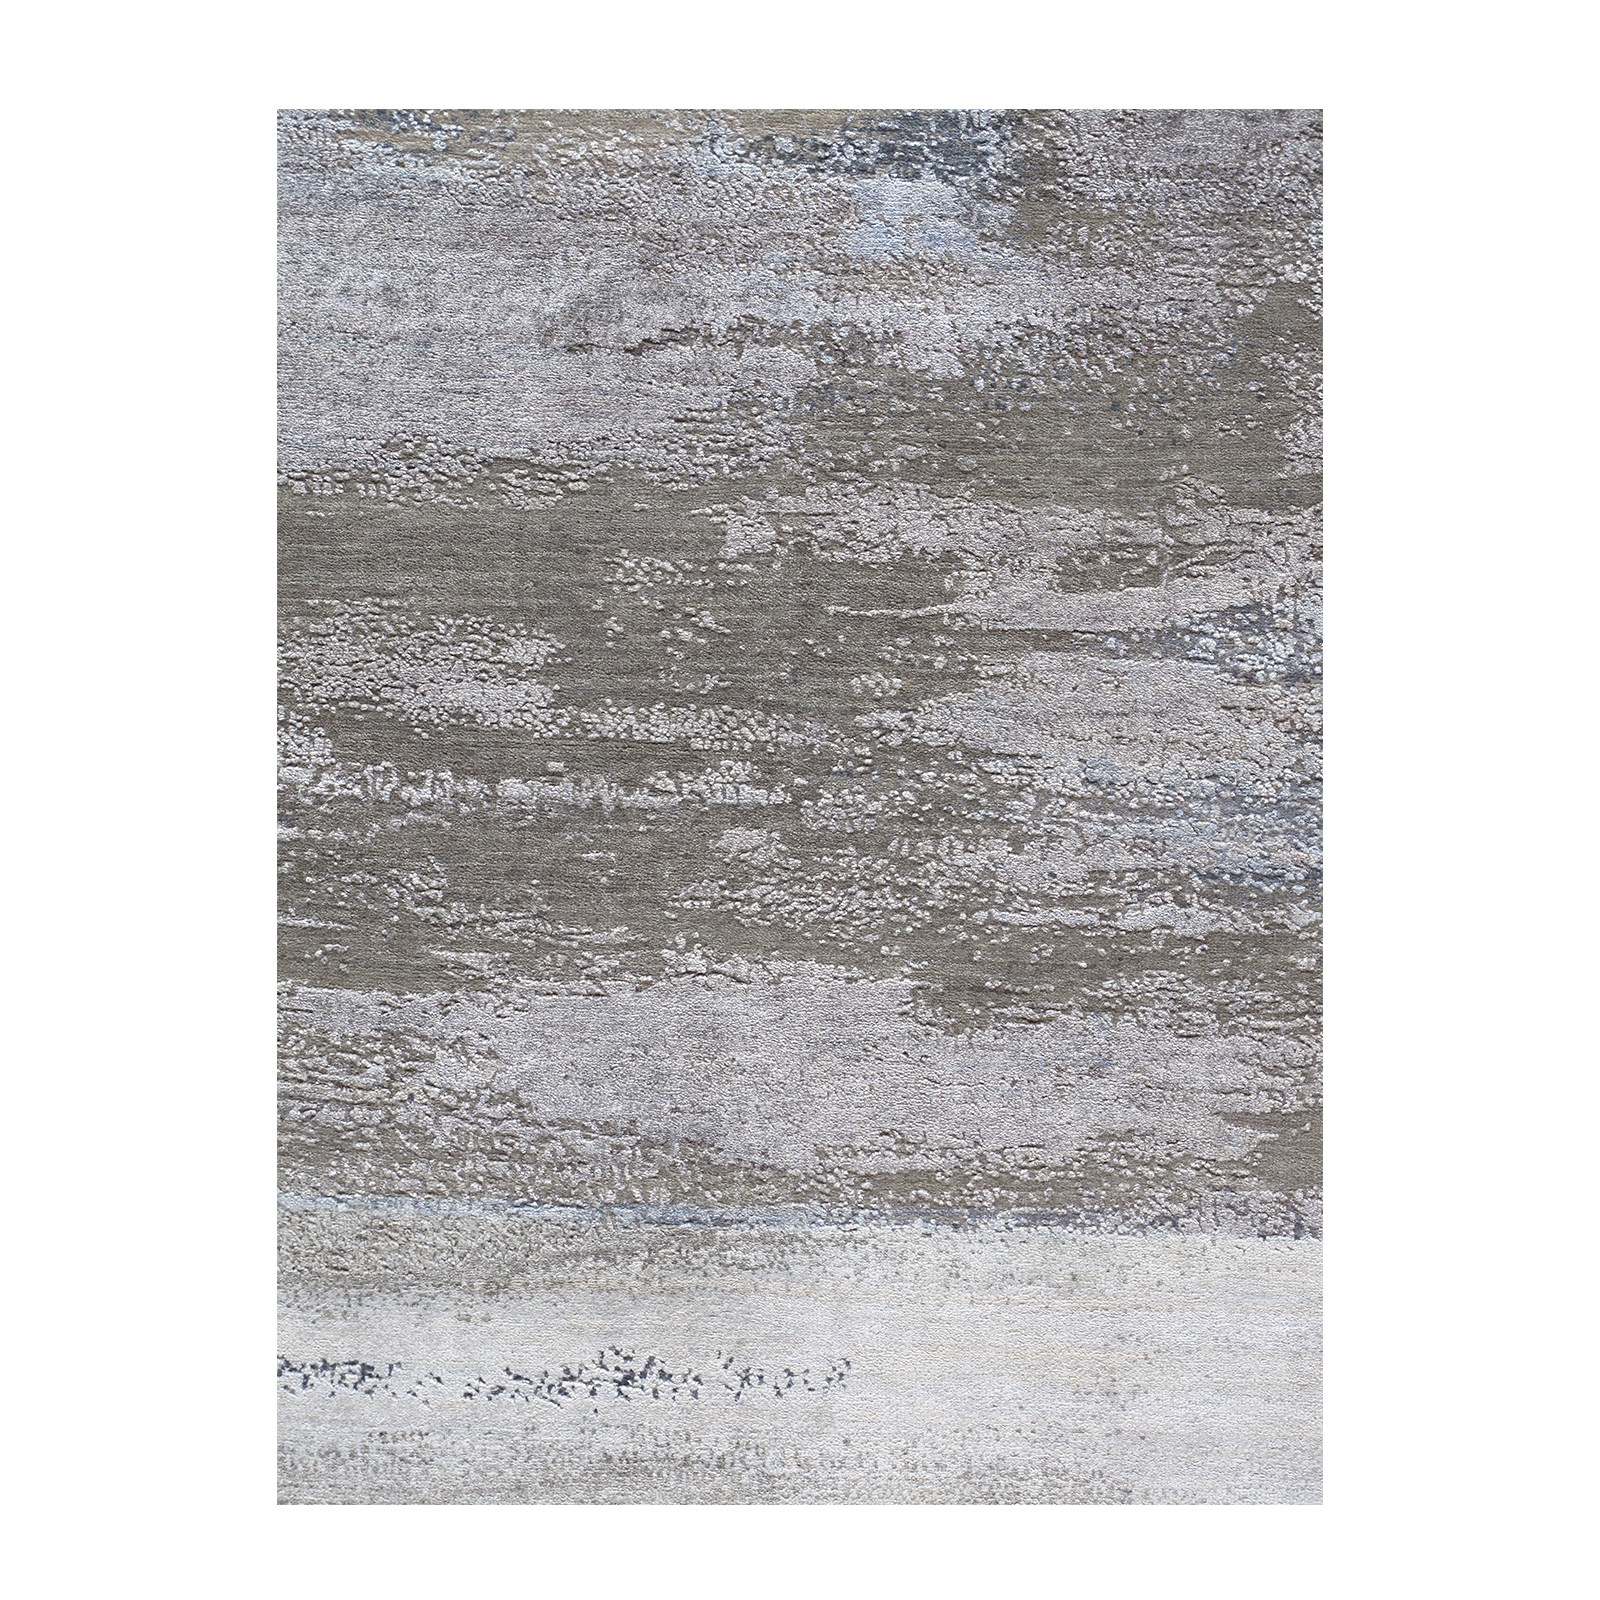 This Kensington rug is hand-knotted and made of wool and pure silk 